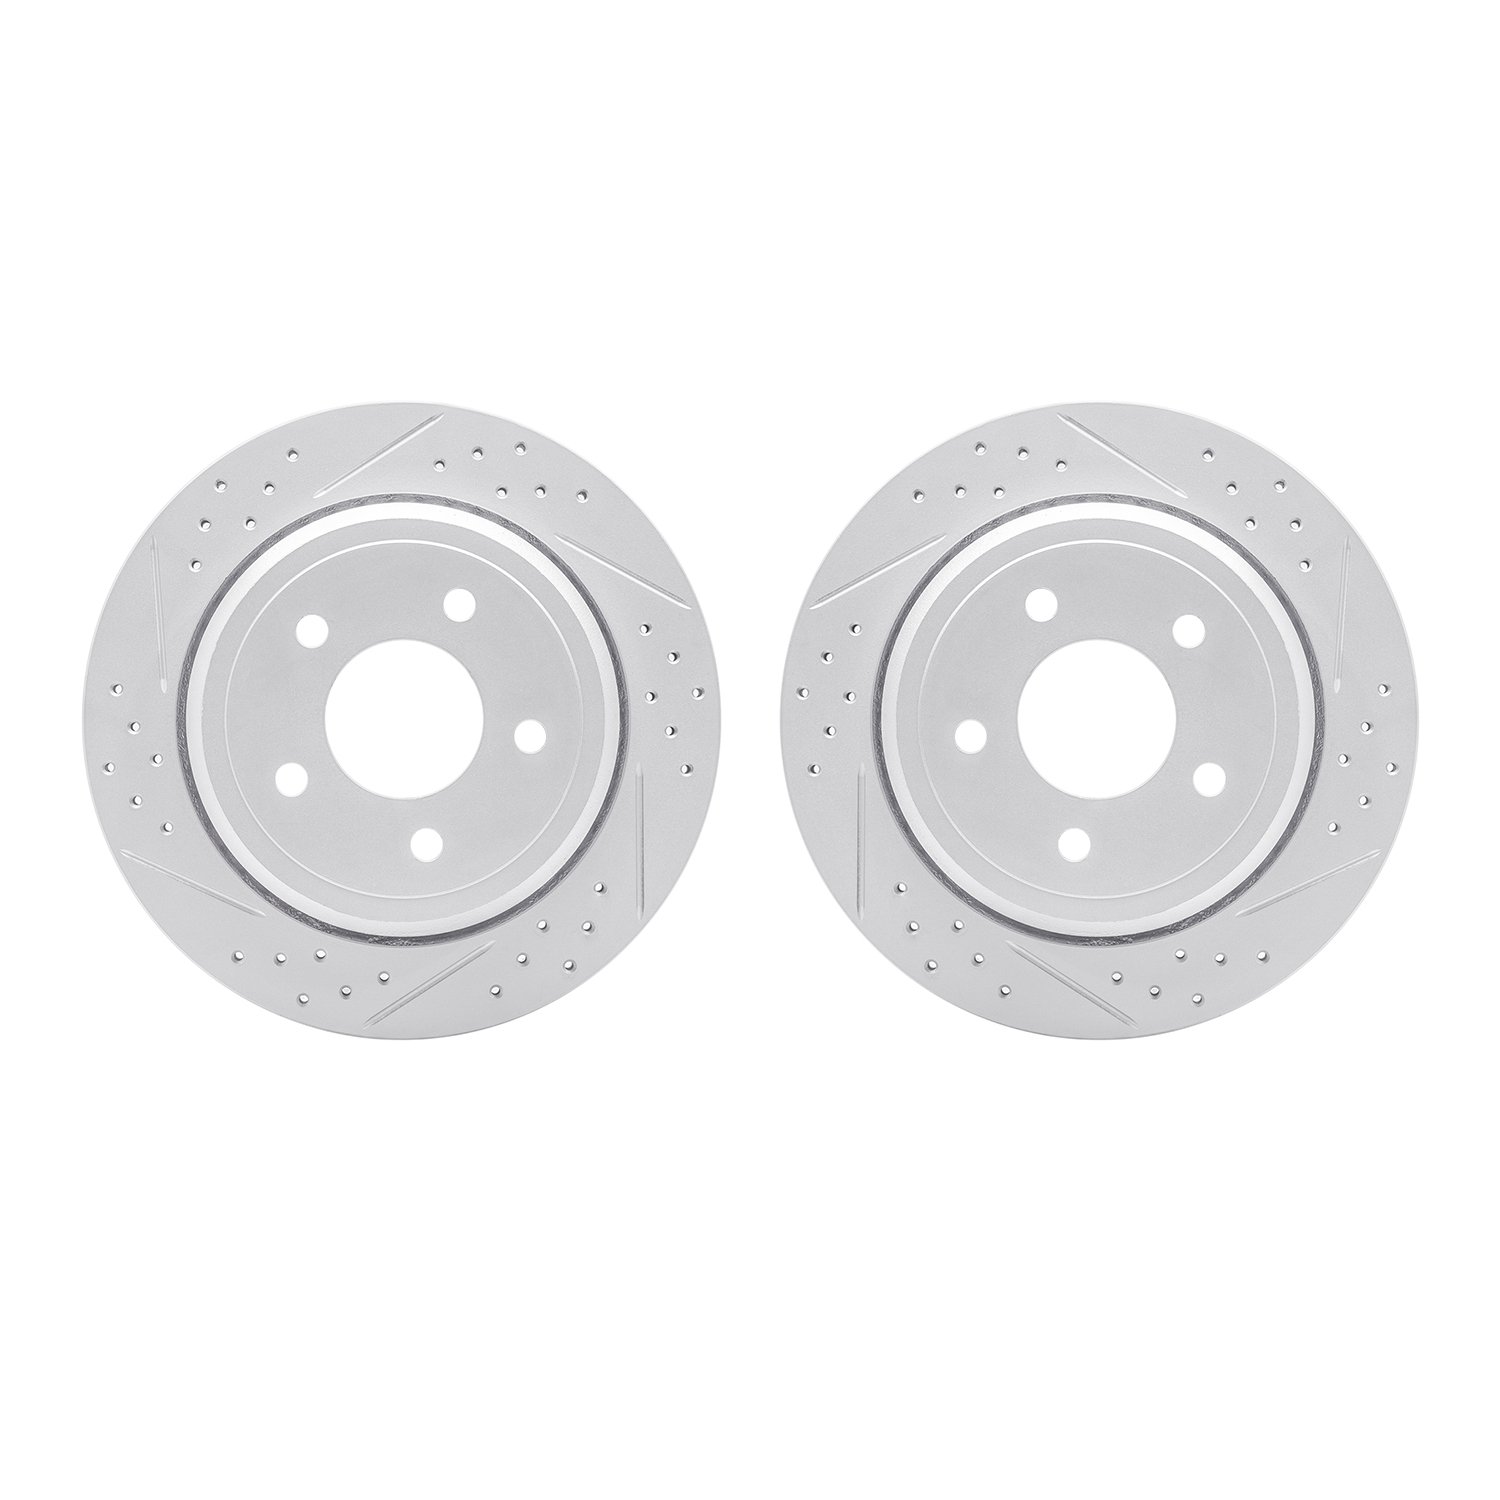 2002-56004 Geoperformance Drilled/Slotted Brake Rotors, 2003-2011 Ford/Lincoln/Mercury/Mazda, Position: Rear